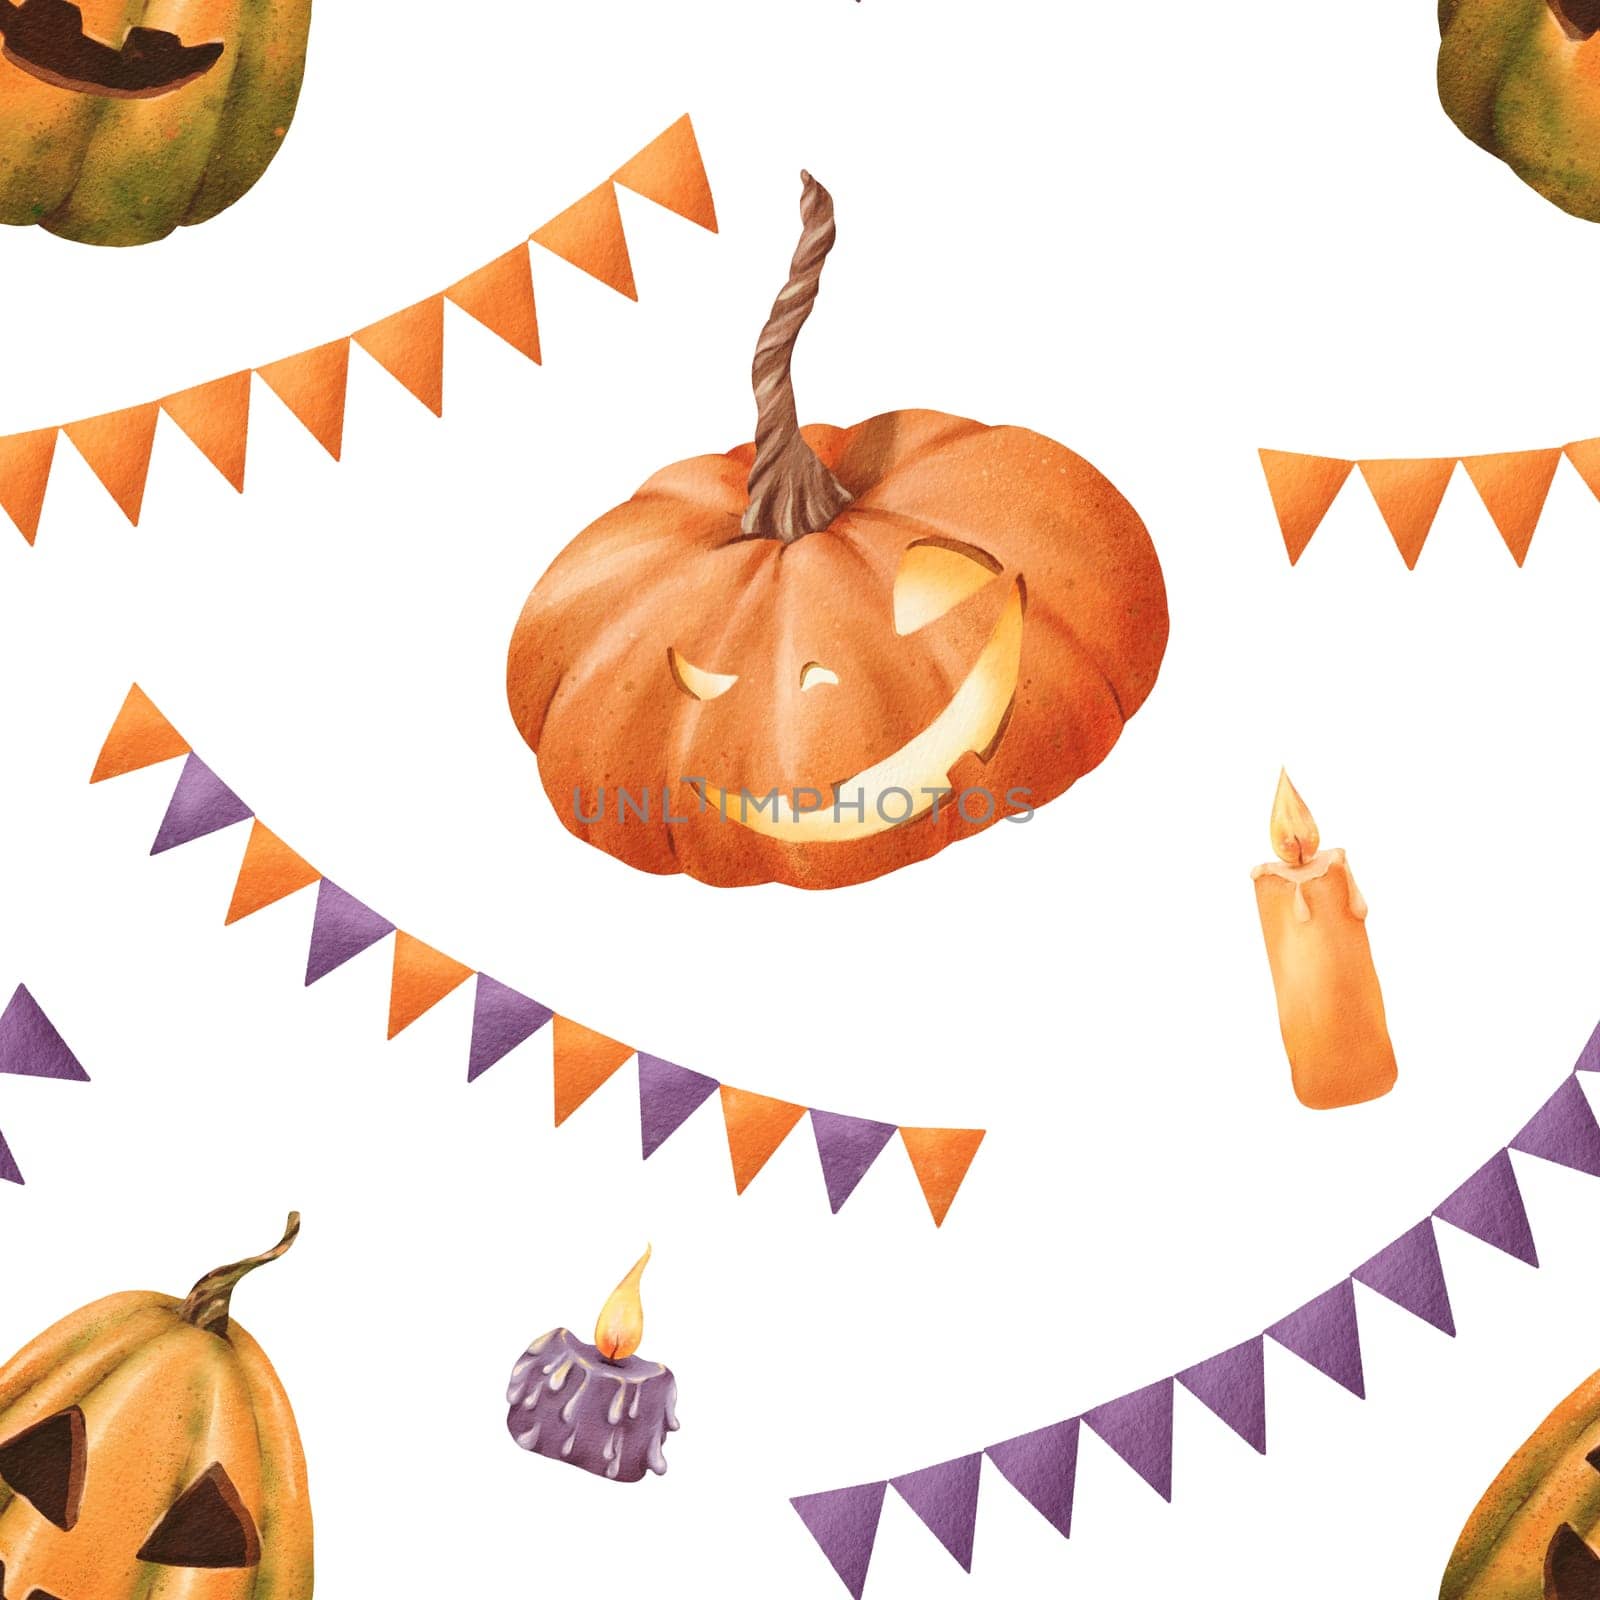 Seamless Halloween pattern. vibrant orange pumpkins with carved faces orange and purple candles festive flags garlands. Classic holiday elements in a watercolor illustration. for packaging, textiles by Art_Mari_Ka